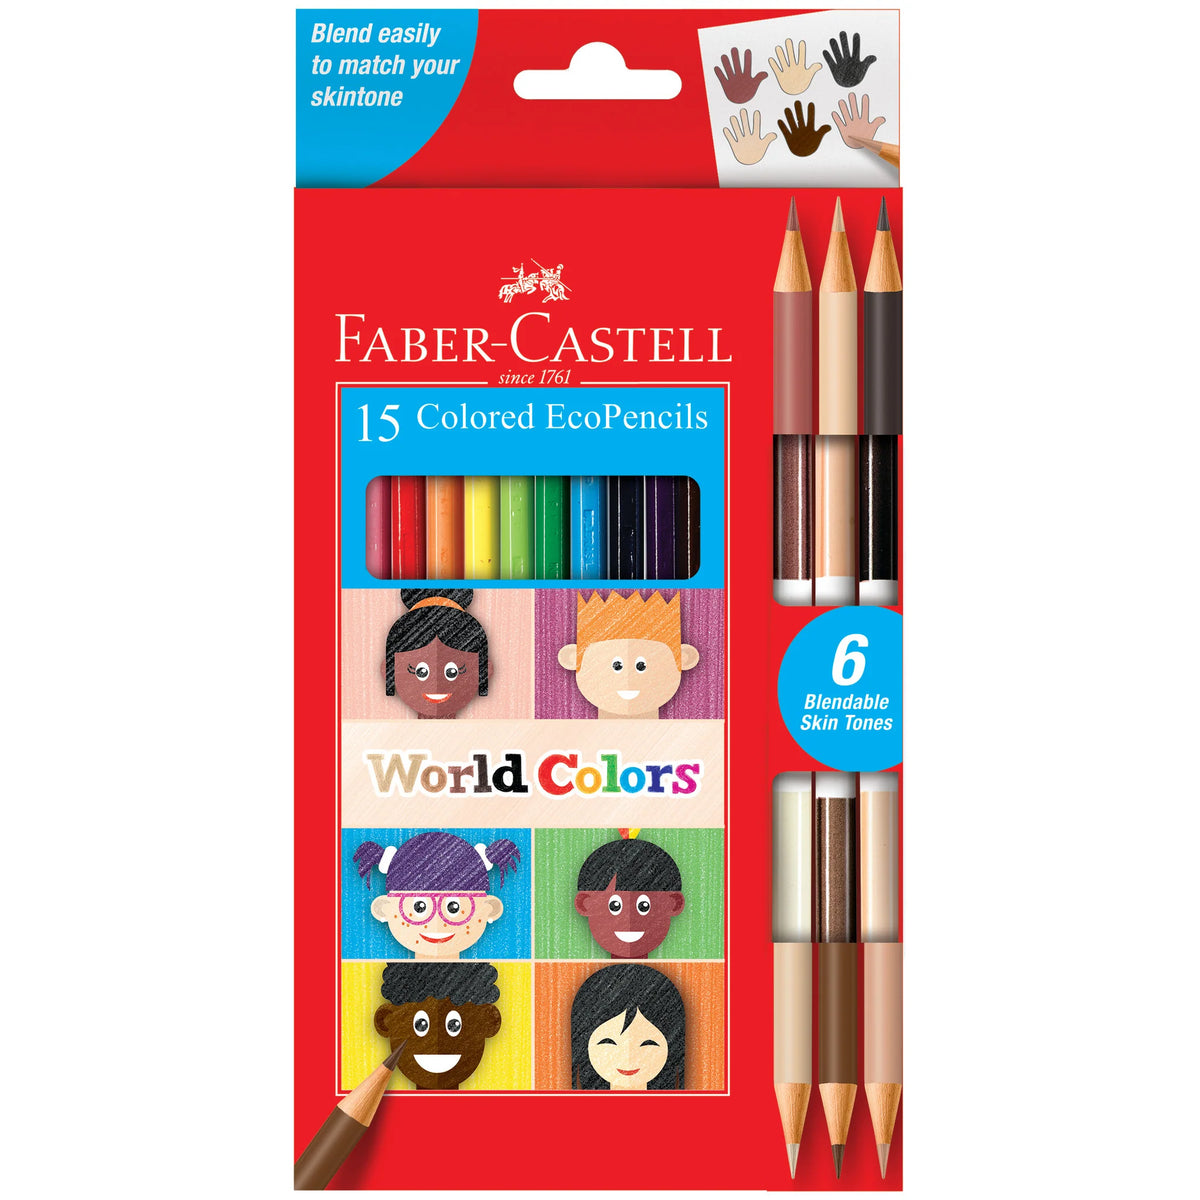 Faber-Castell - World Colors 15 Colored EcoPencils